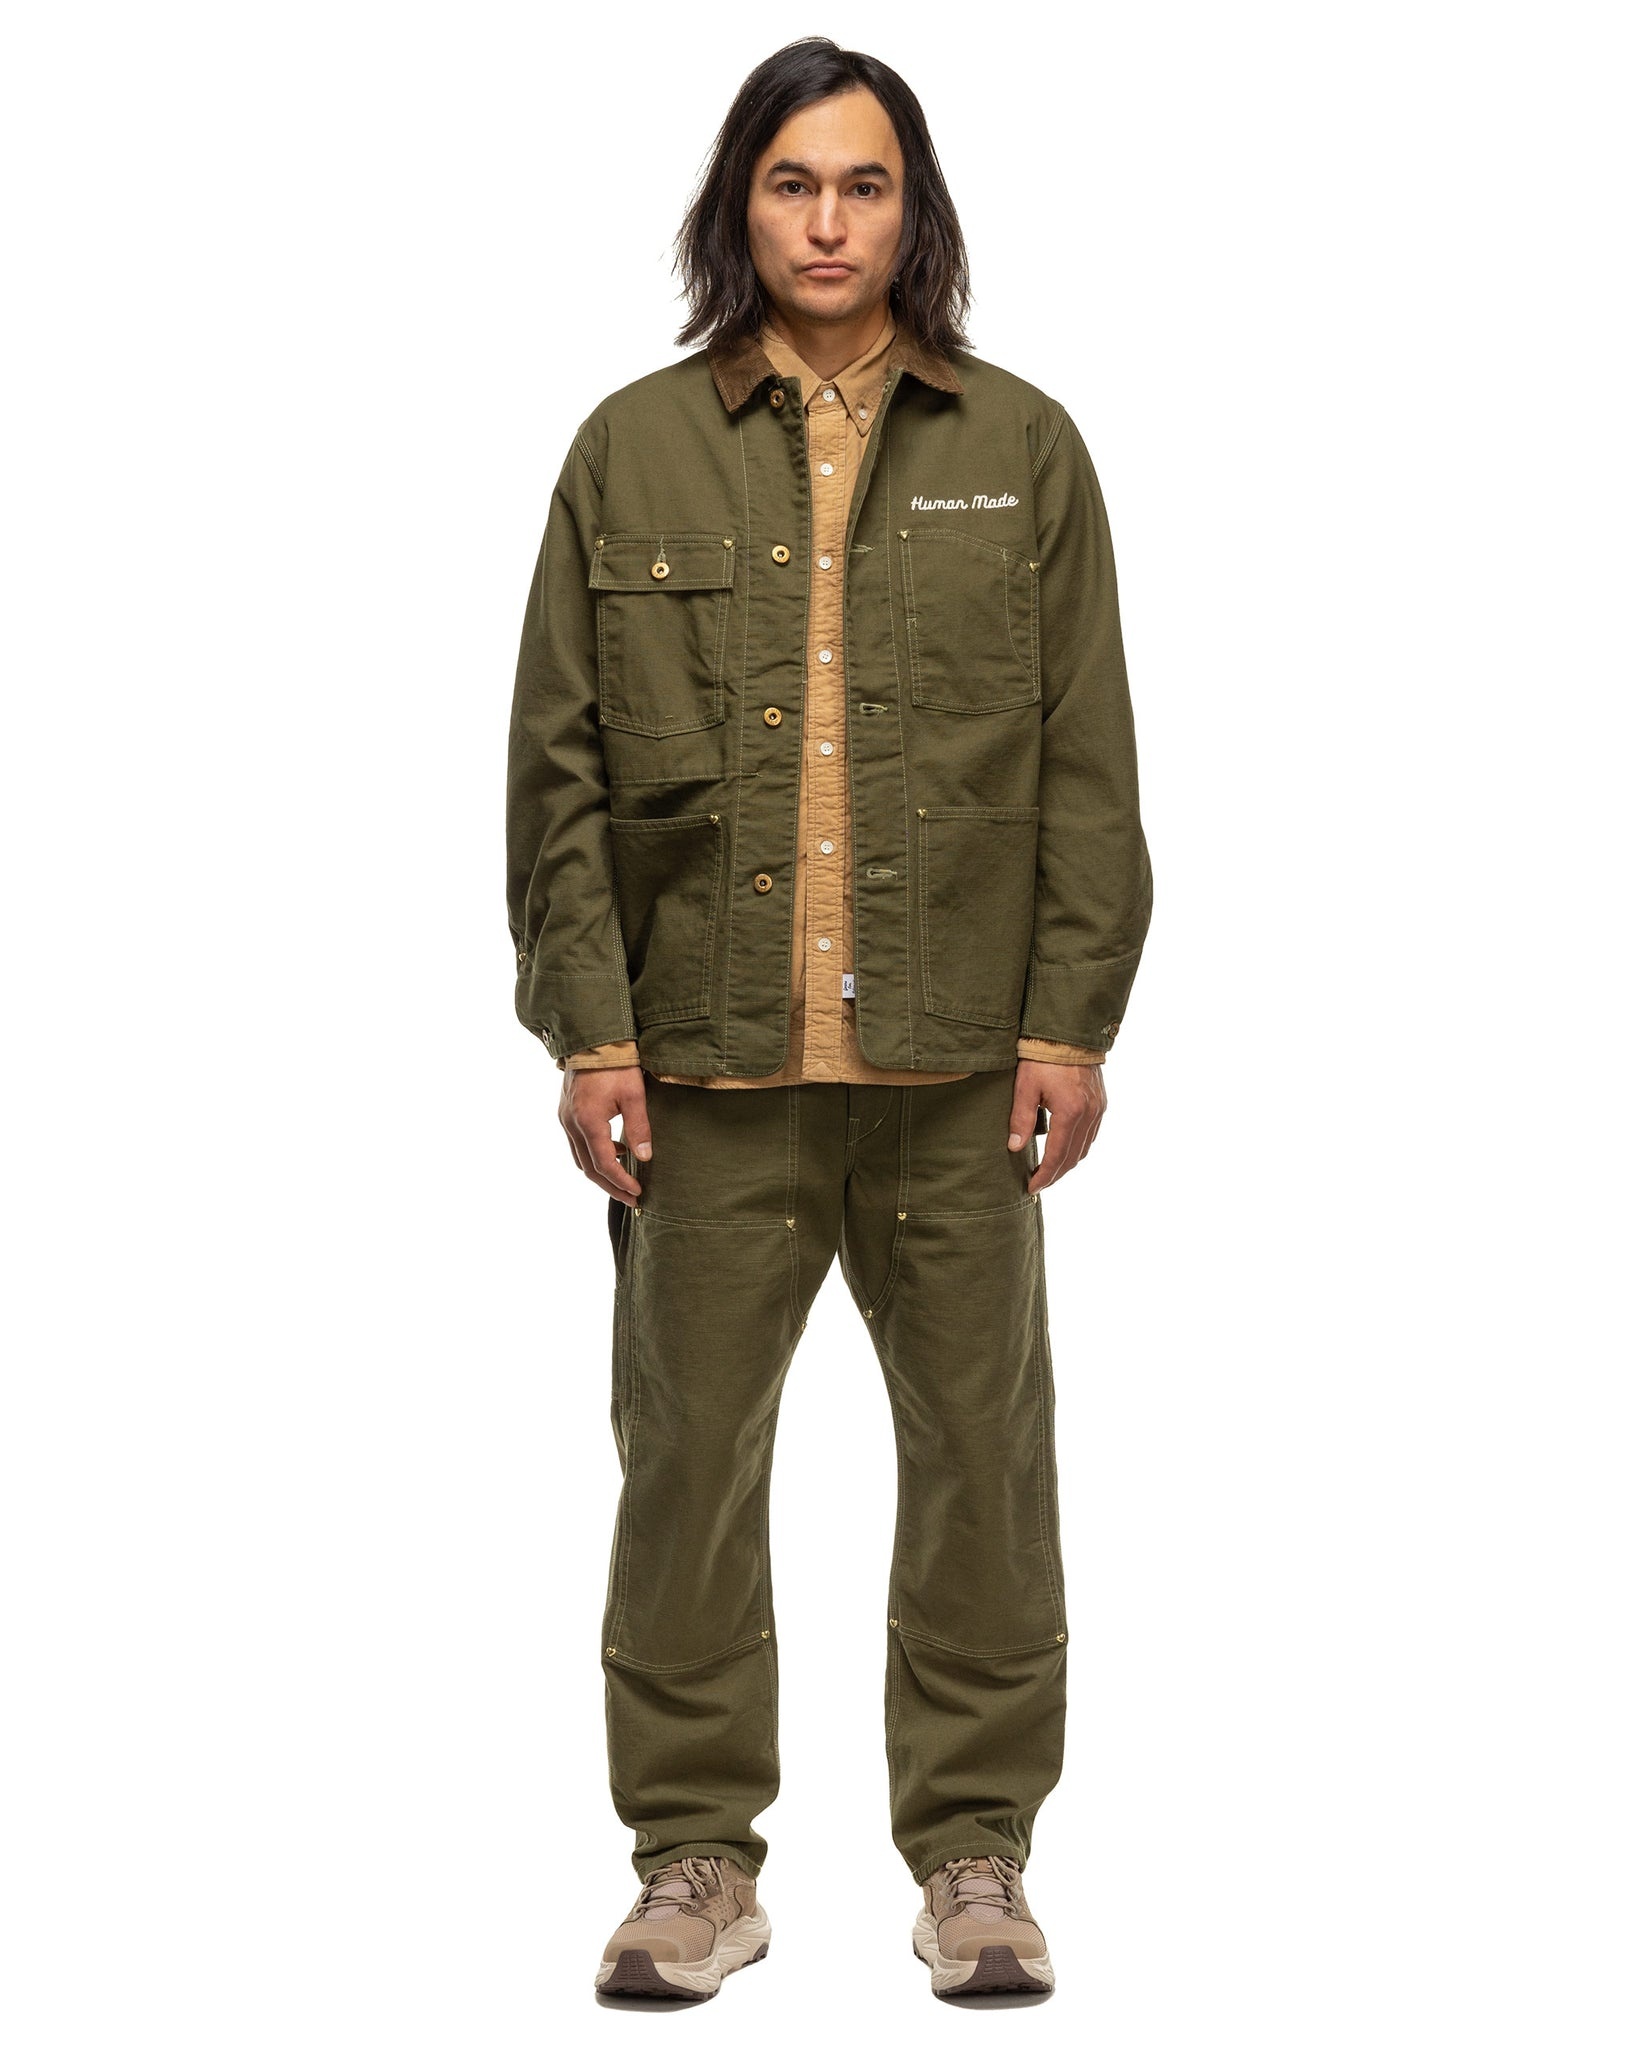 Human Made Duck Painter Pants Olive Drab | REVERSIBLE